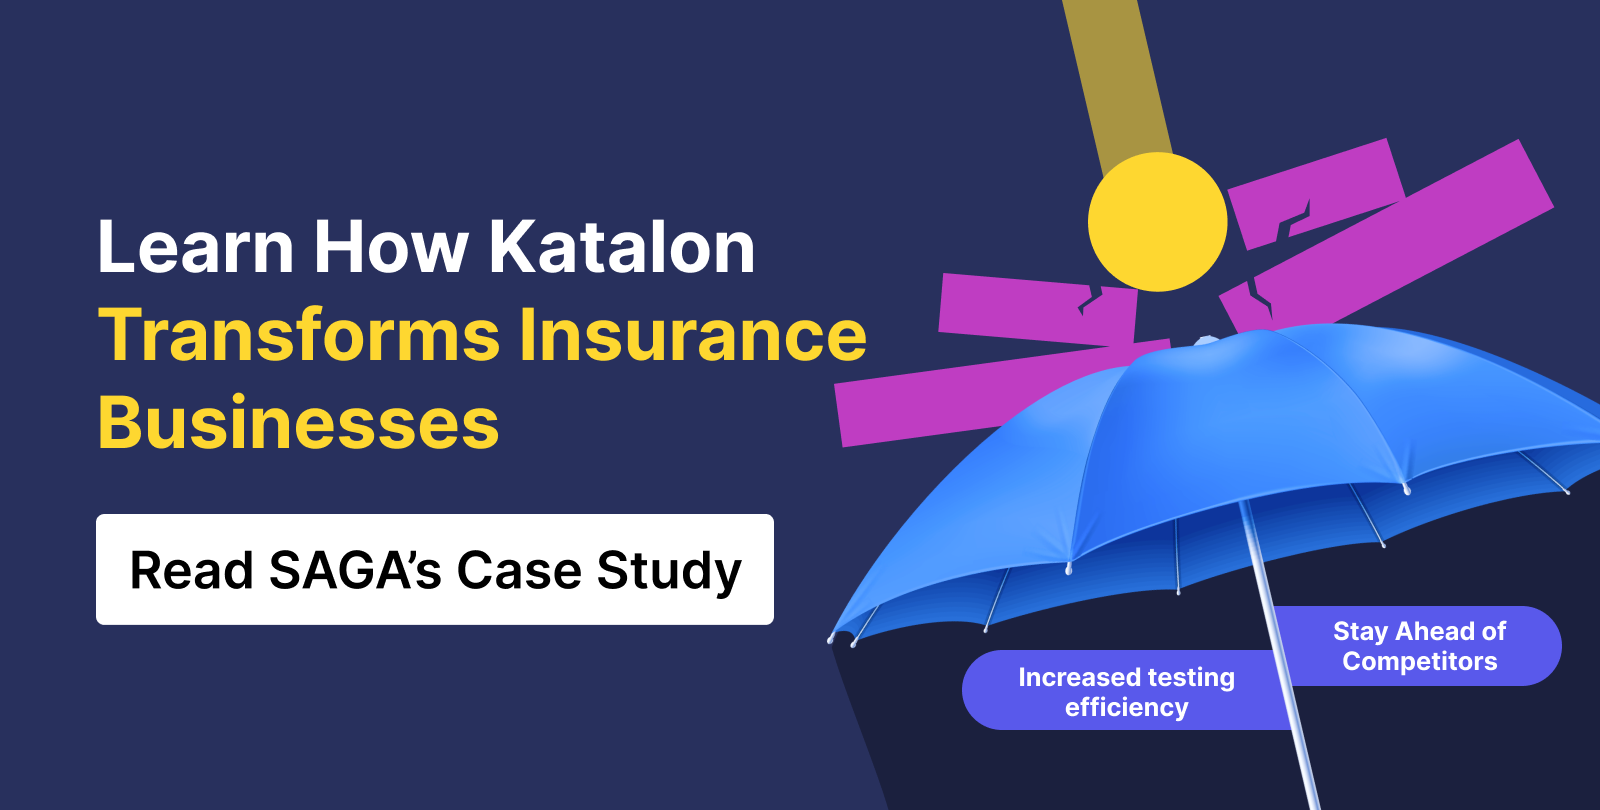 Insurance application testing with Katalon case study from SAGA a leading insurance provider in the UK